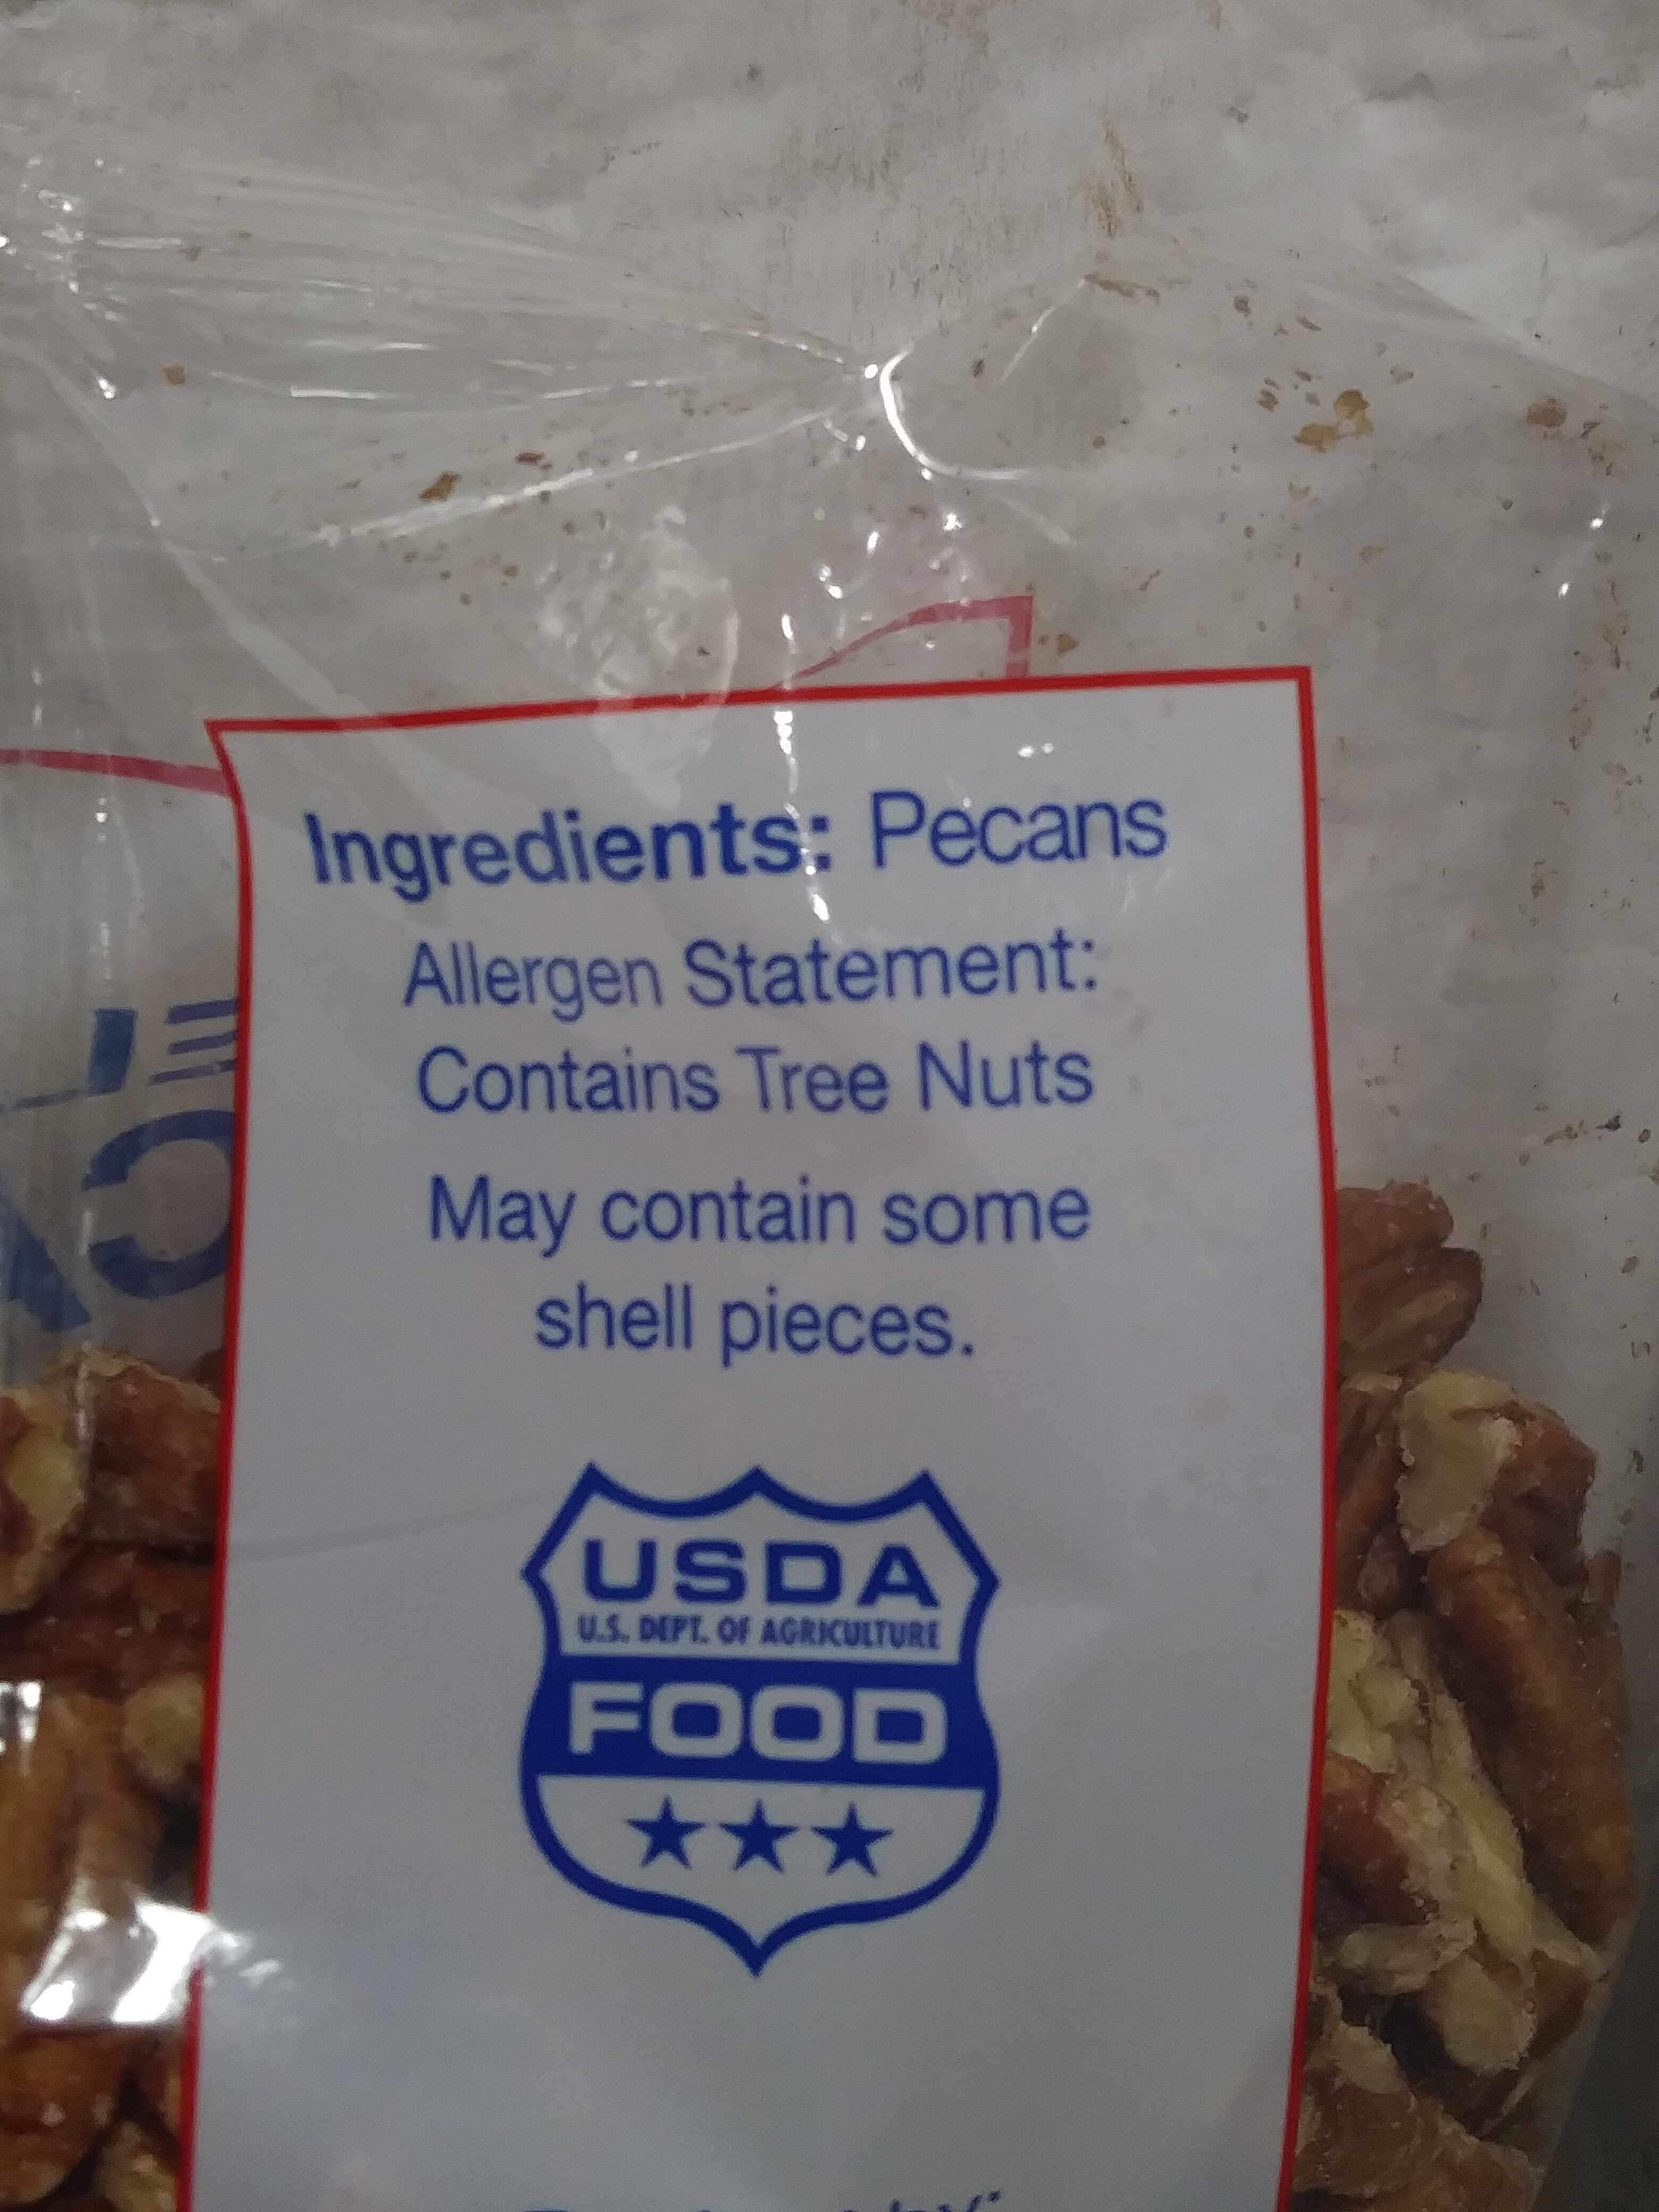 California pecans all natural shelled halves and pieces - Ingredients - en